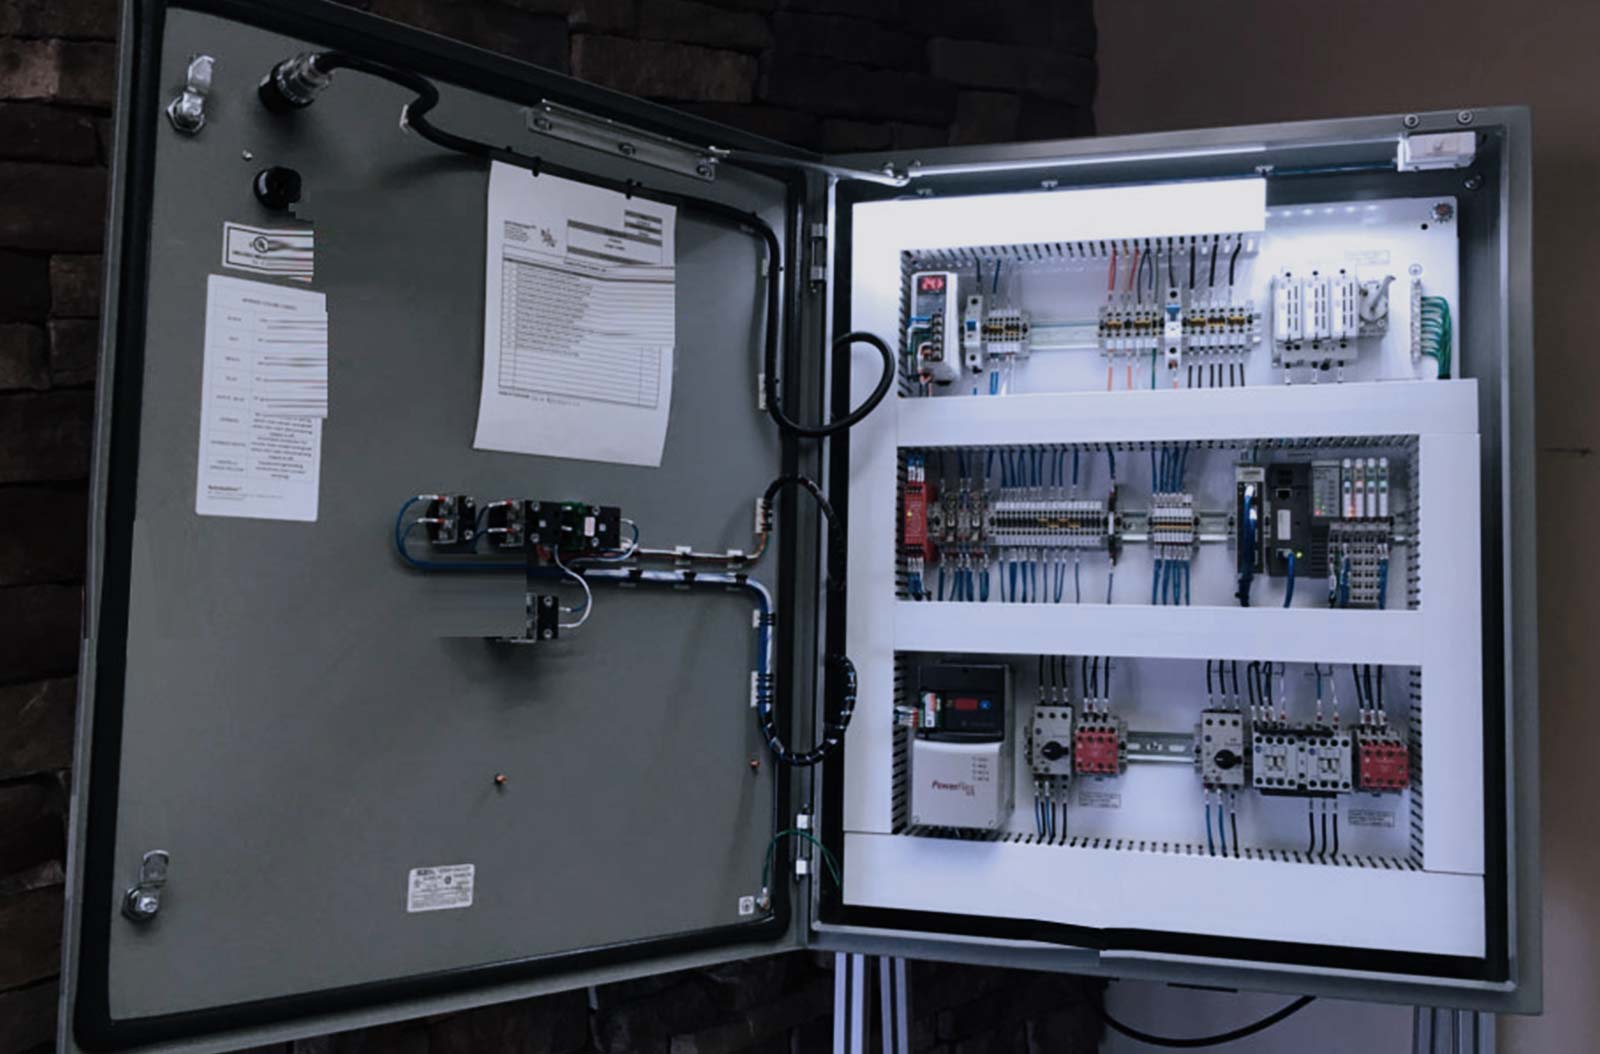 Panel example photo with lots of wiring